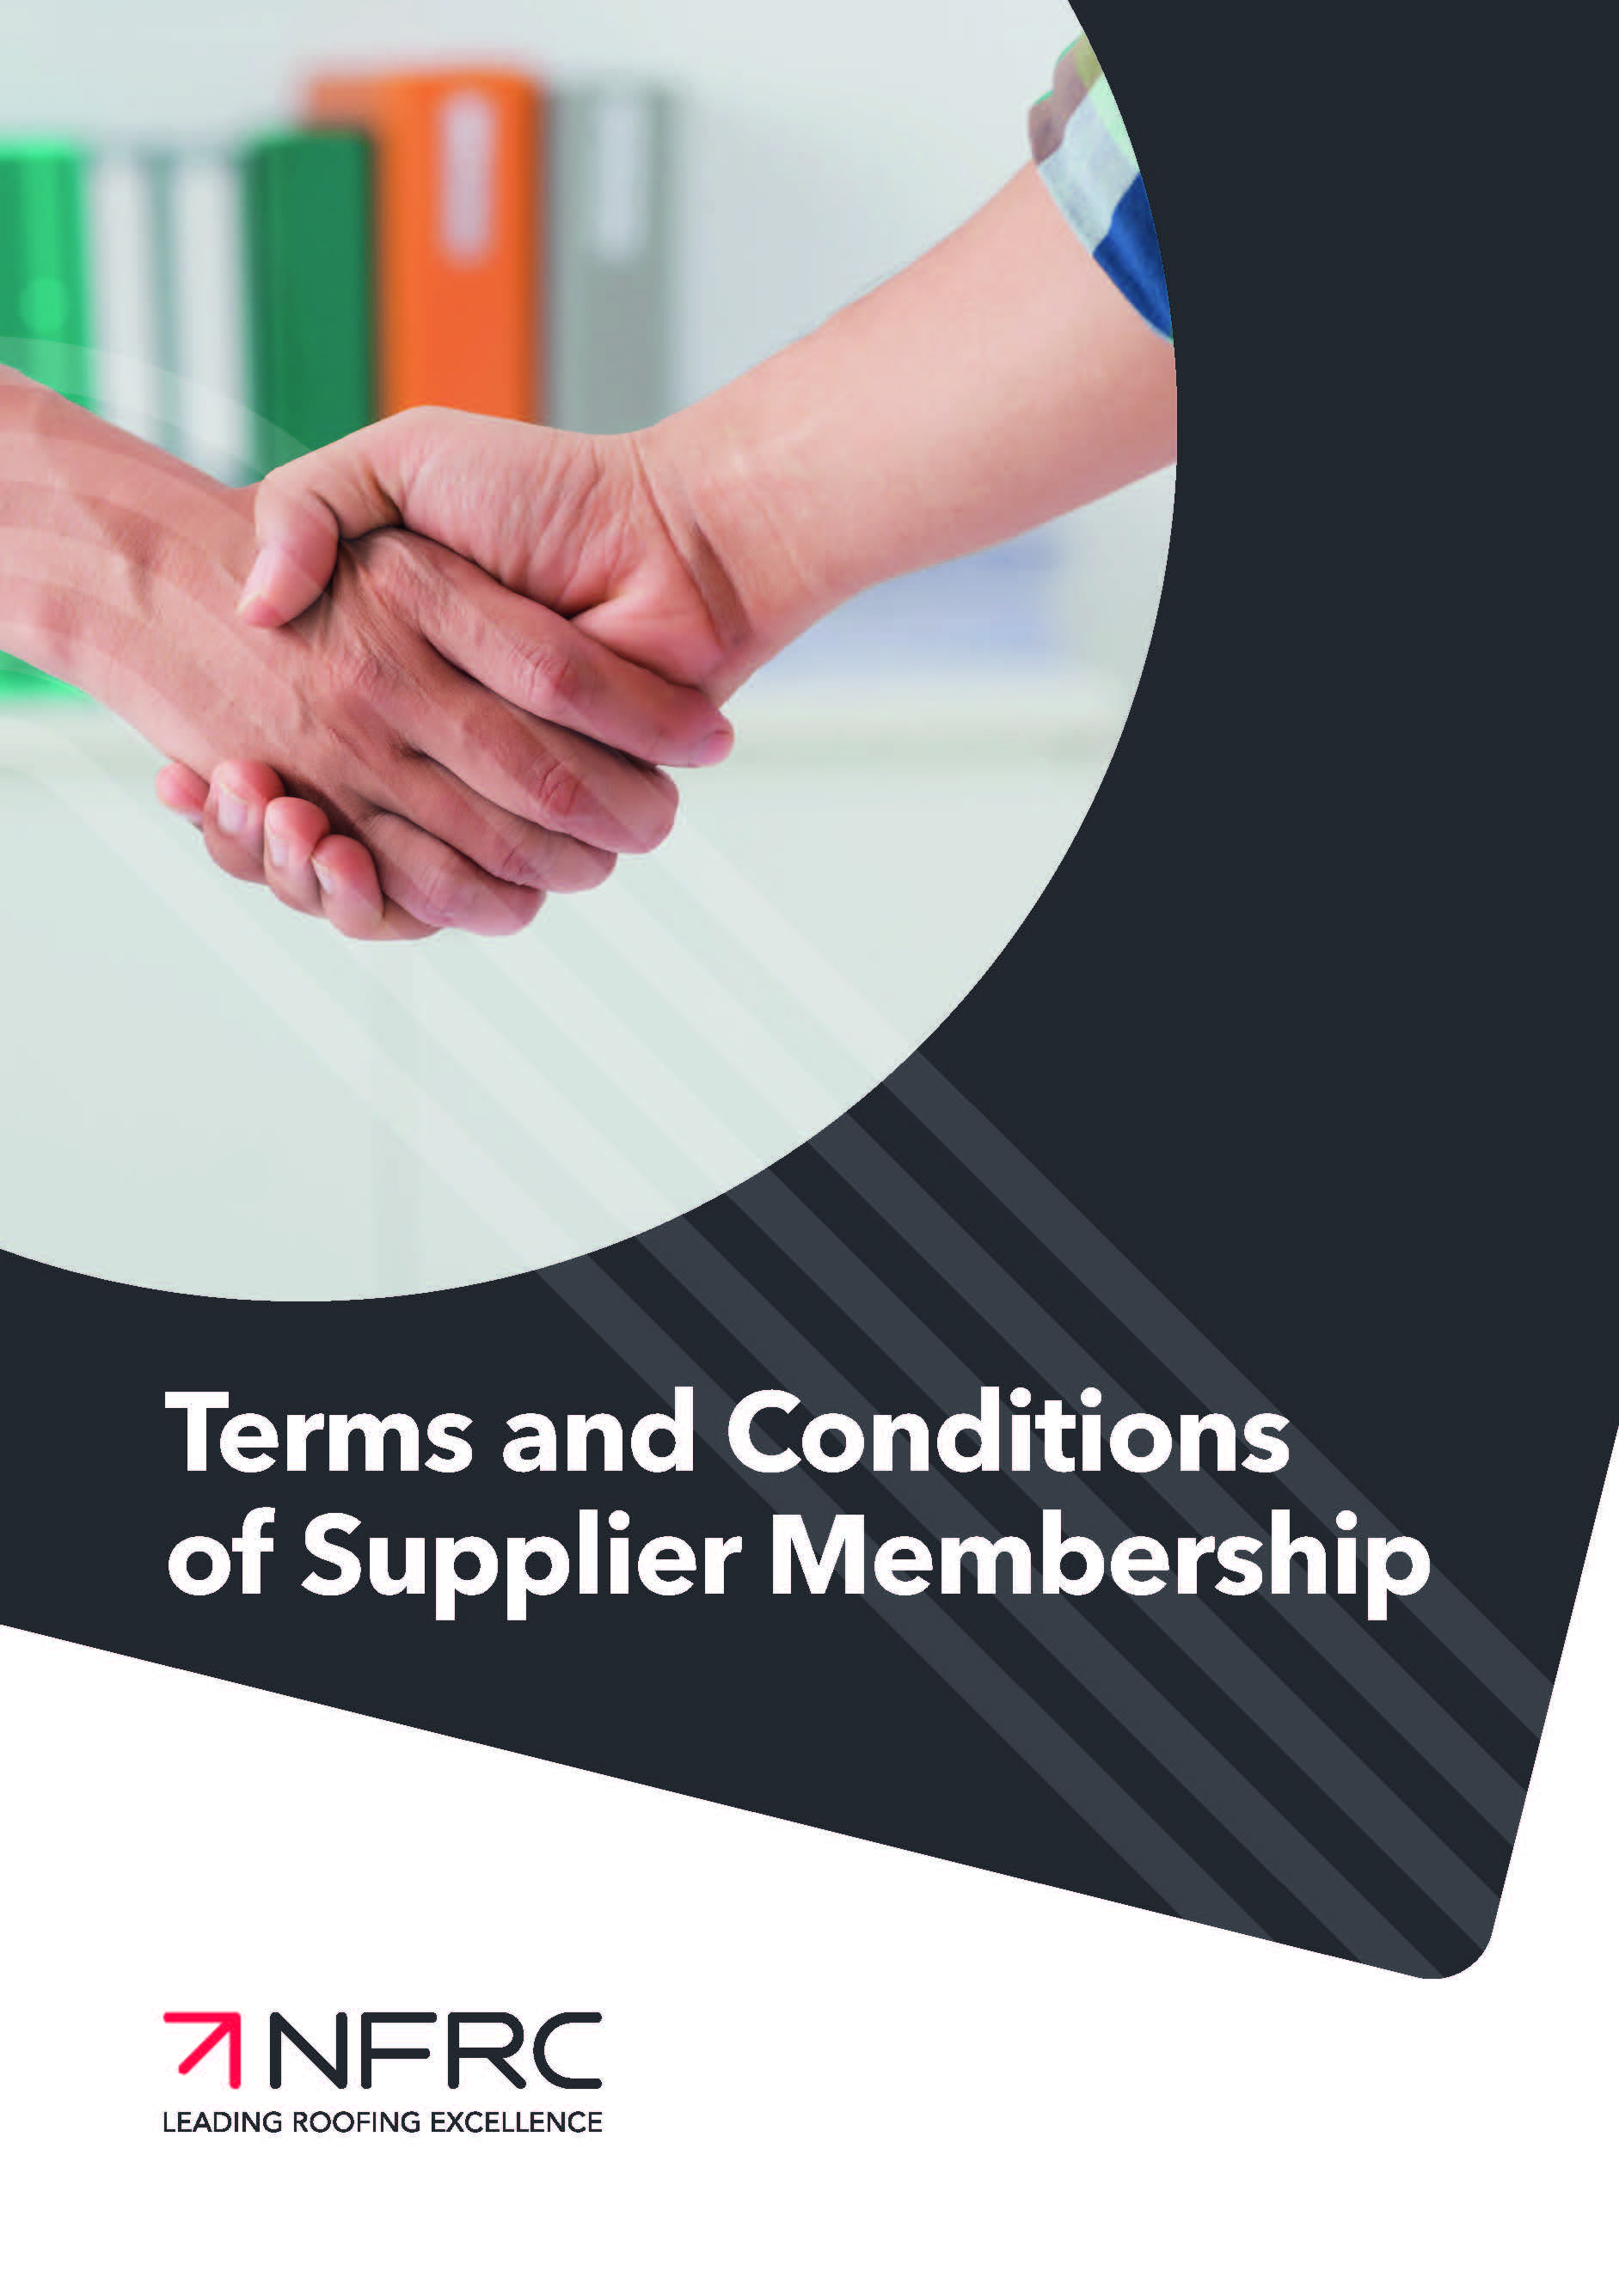 NFRC Terms and Conditions of Supplier Membership